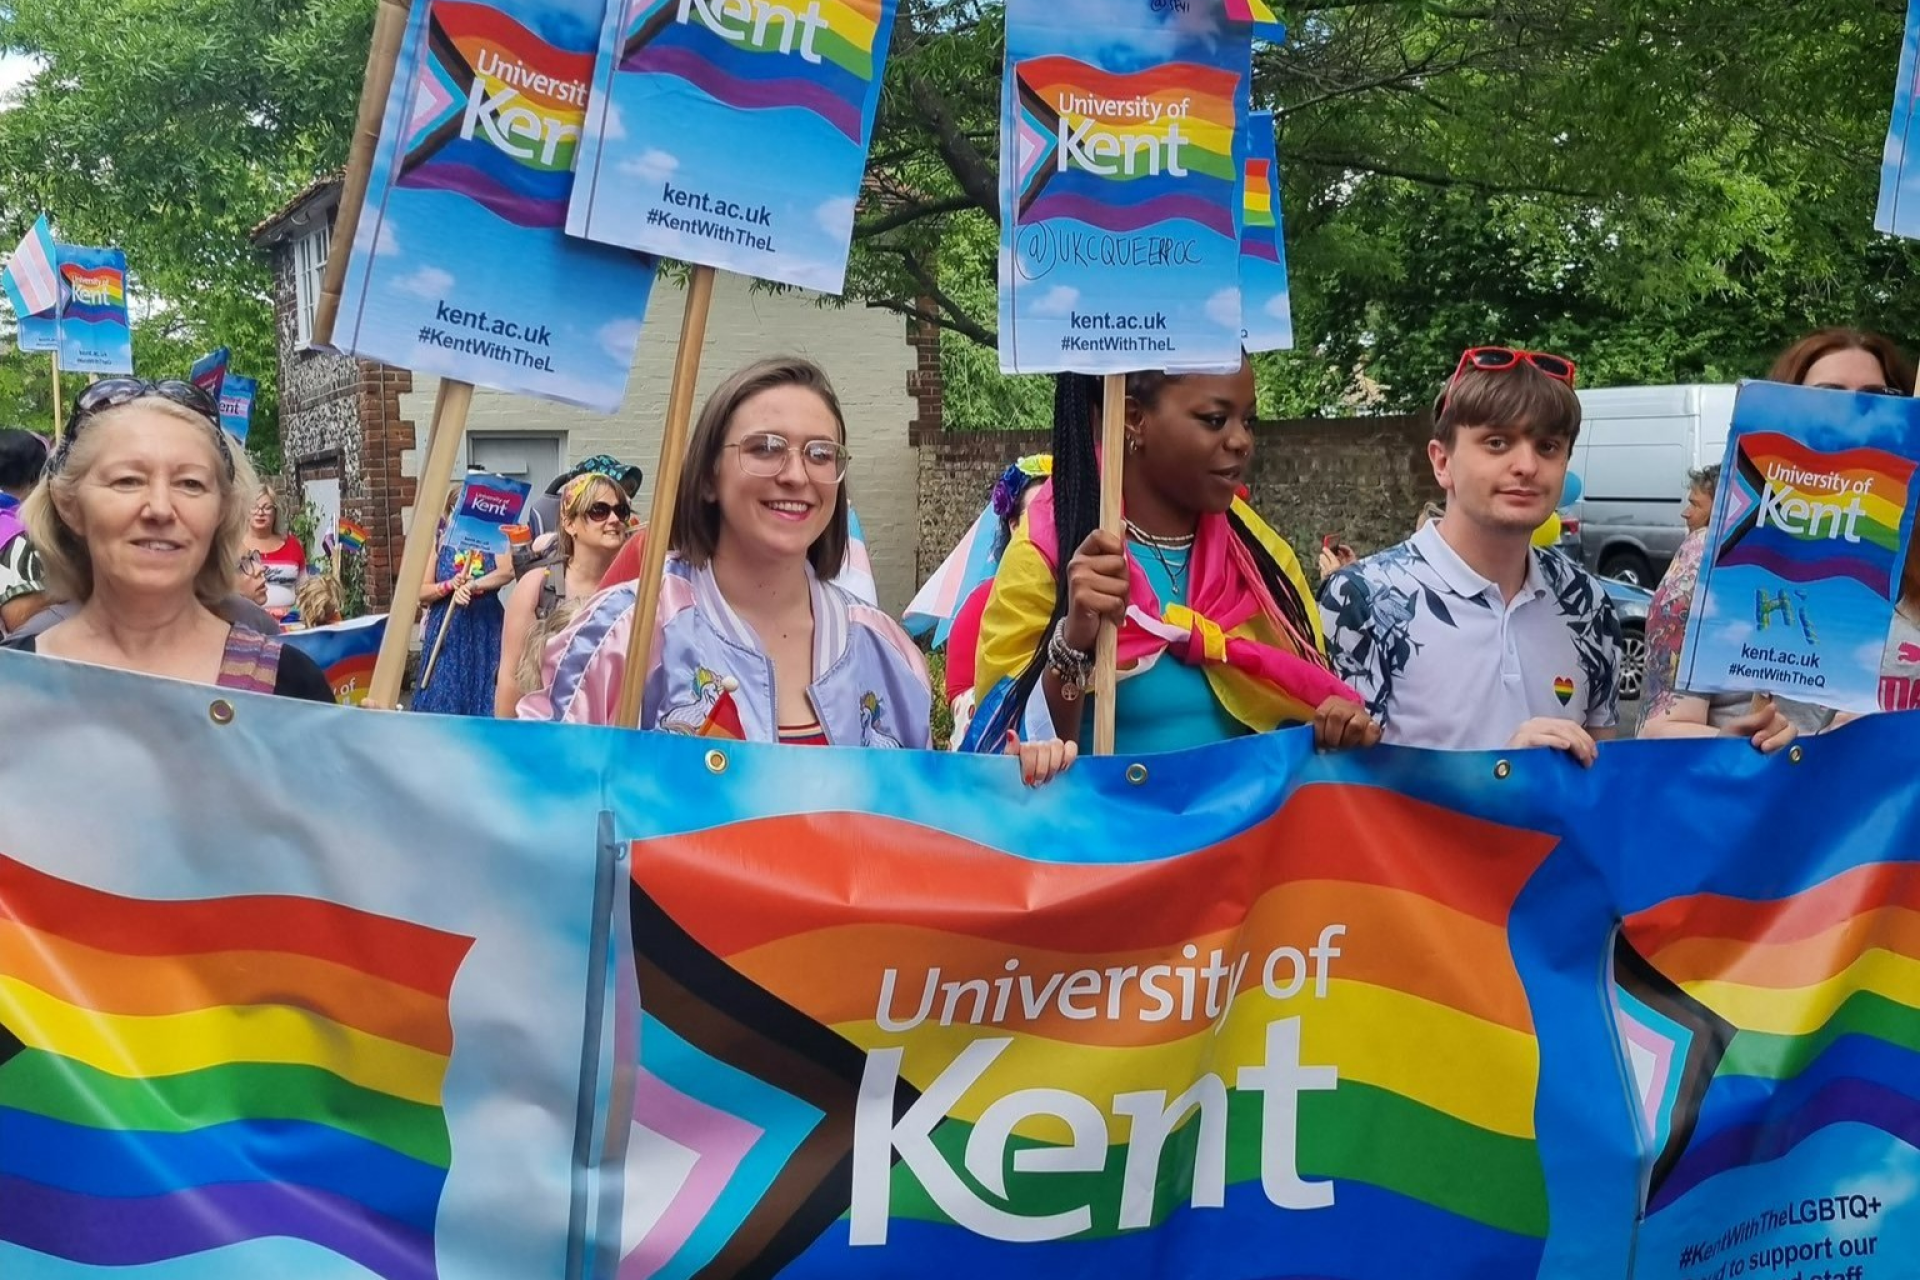 Image shows Kent staff and students holding Pride banners